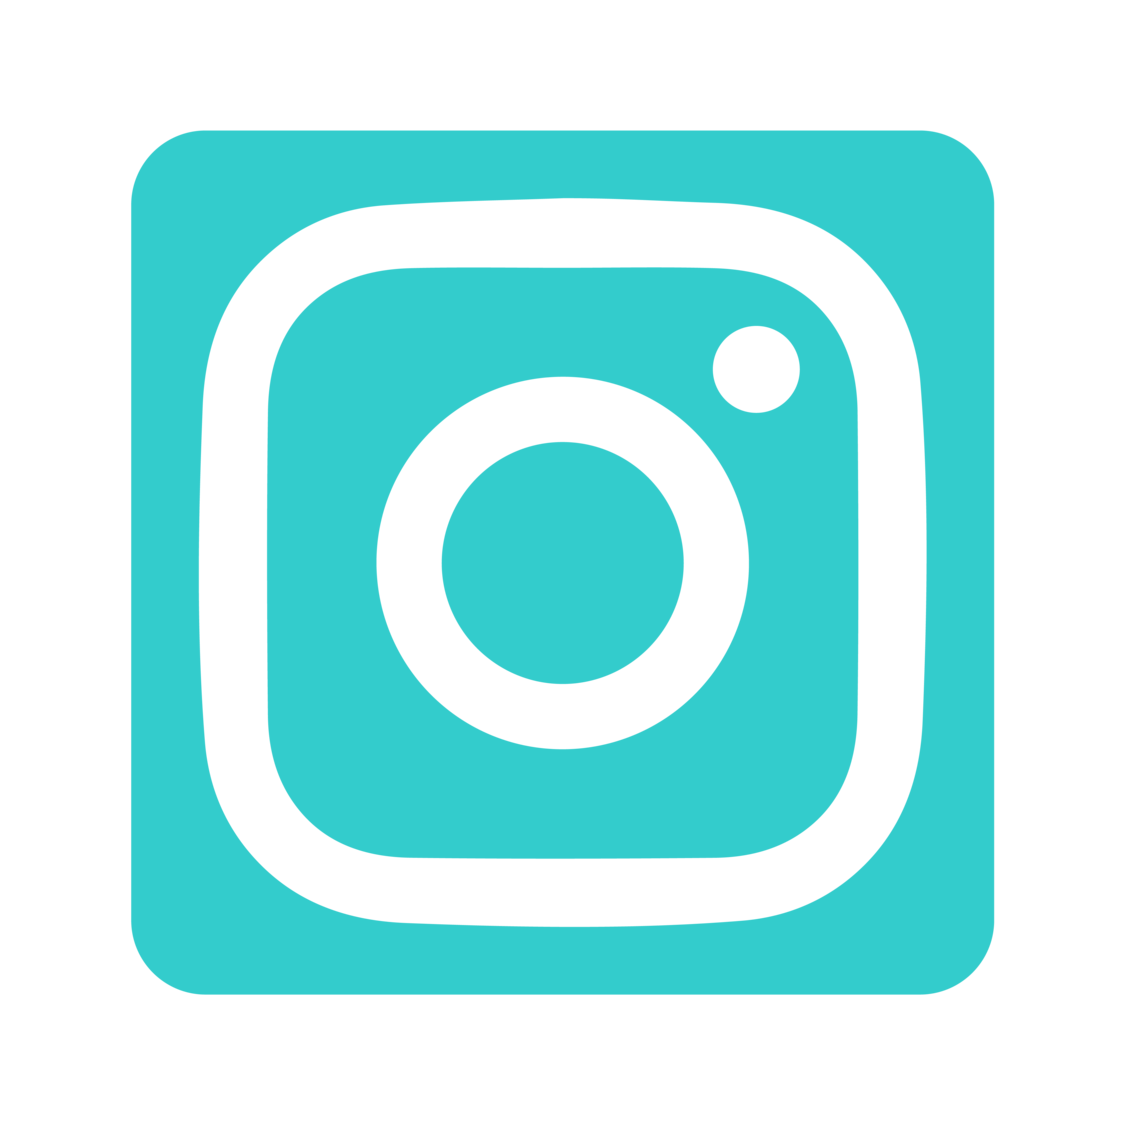 Teal Instagram logo of outlines of a polaroid camera.